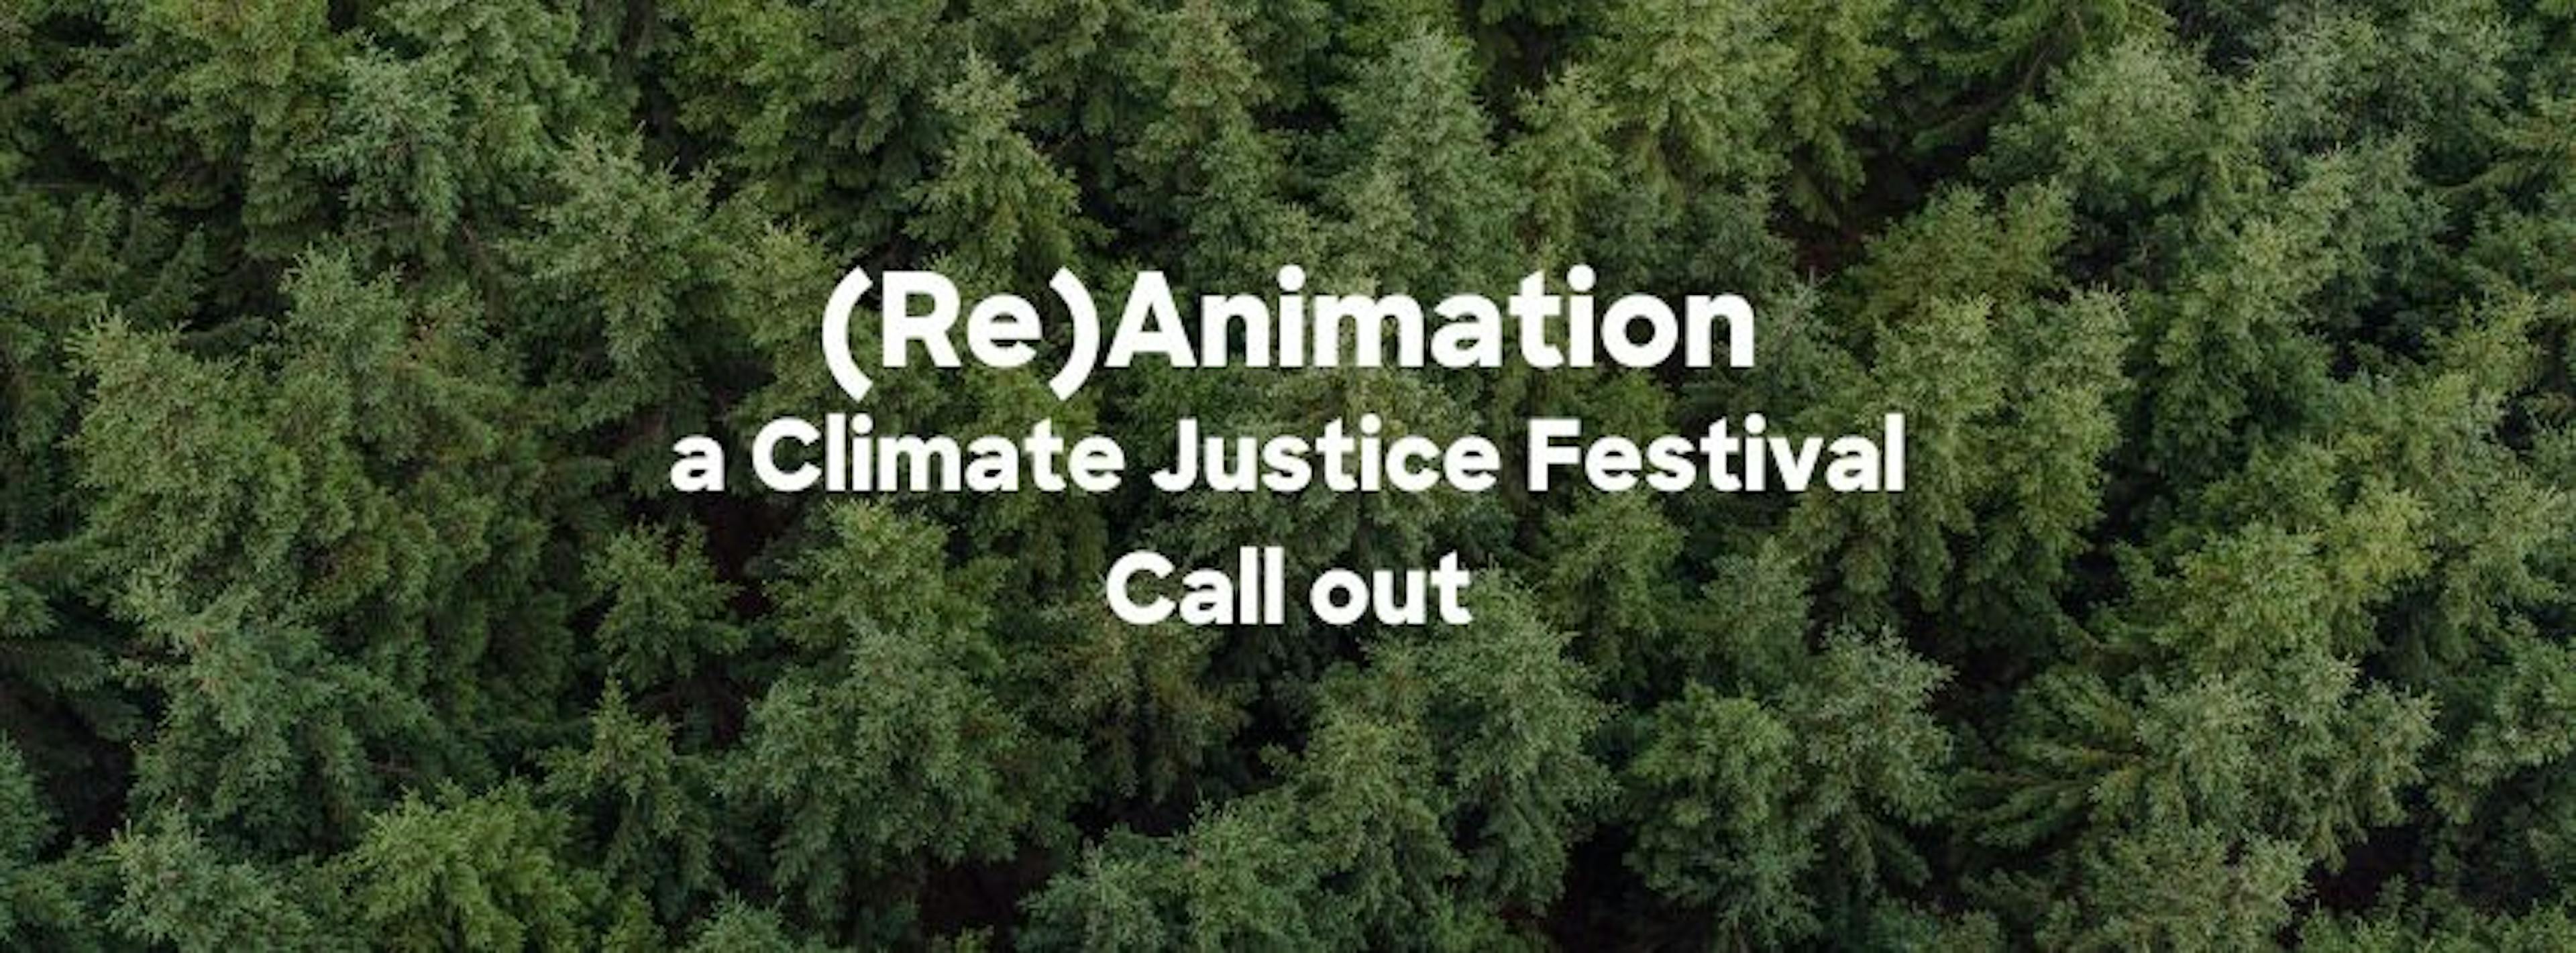 Top view of pine forest - Re Animation A Climate Justice Festival Call Out over the top